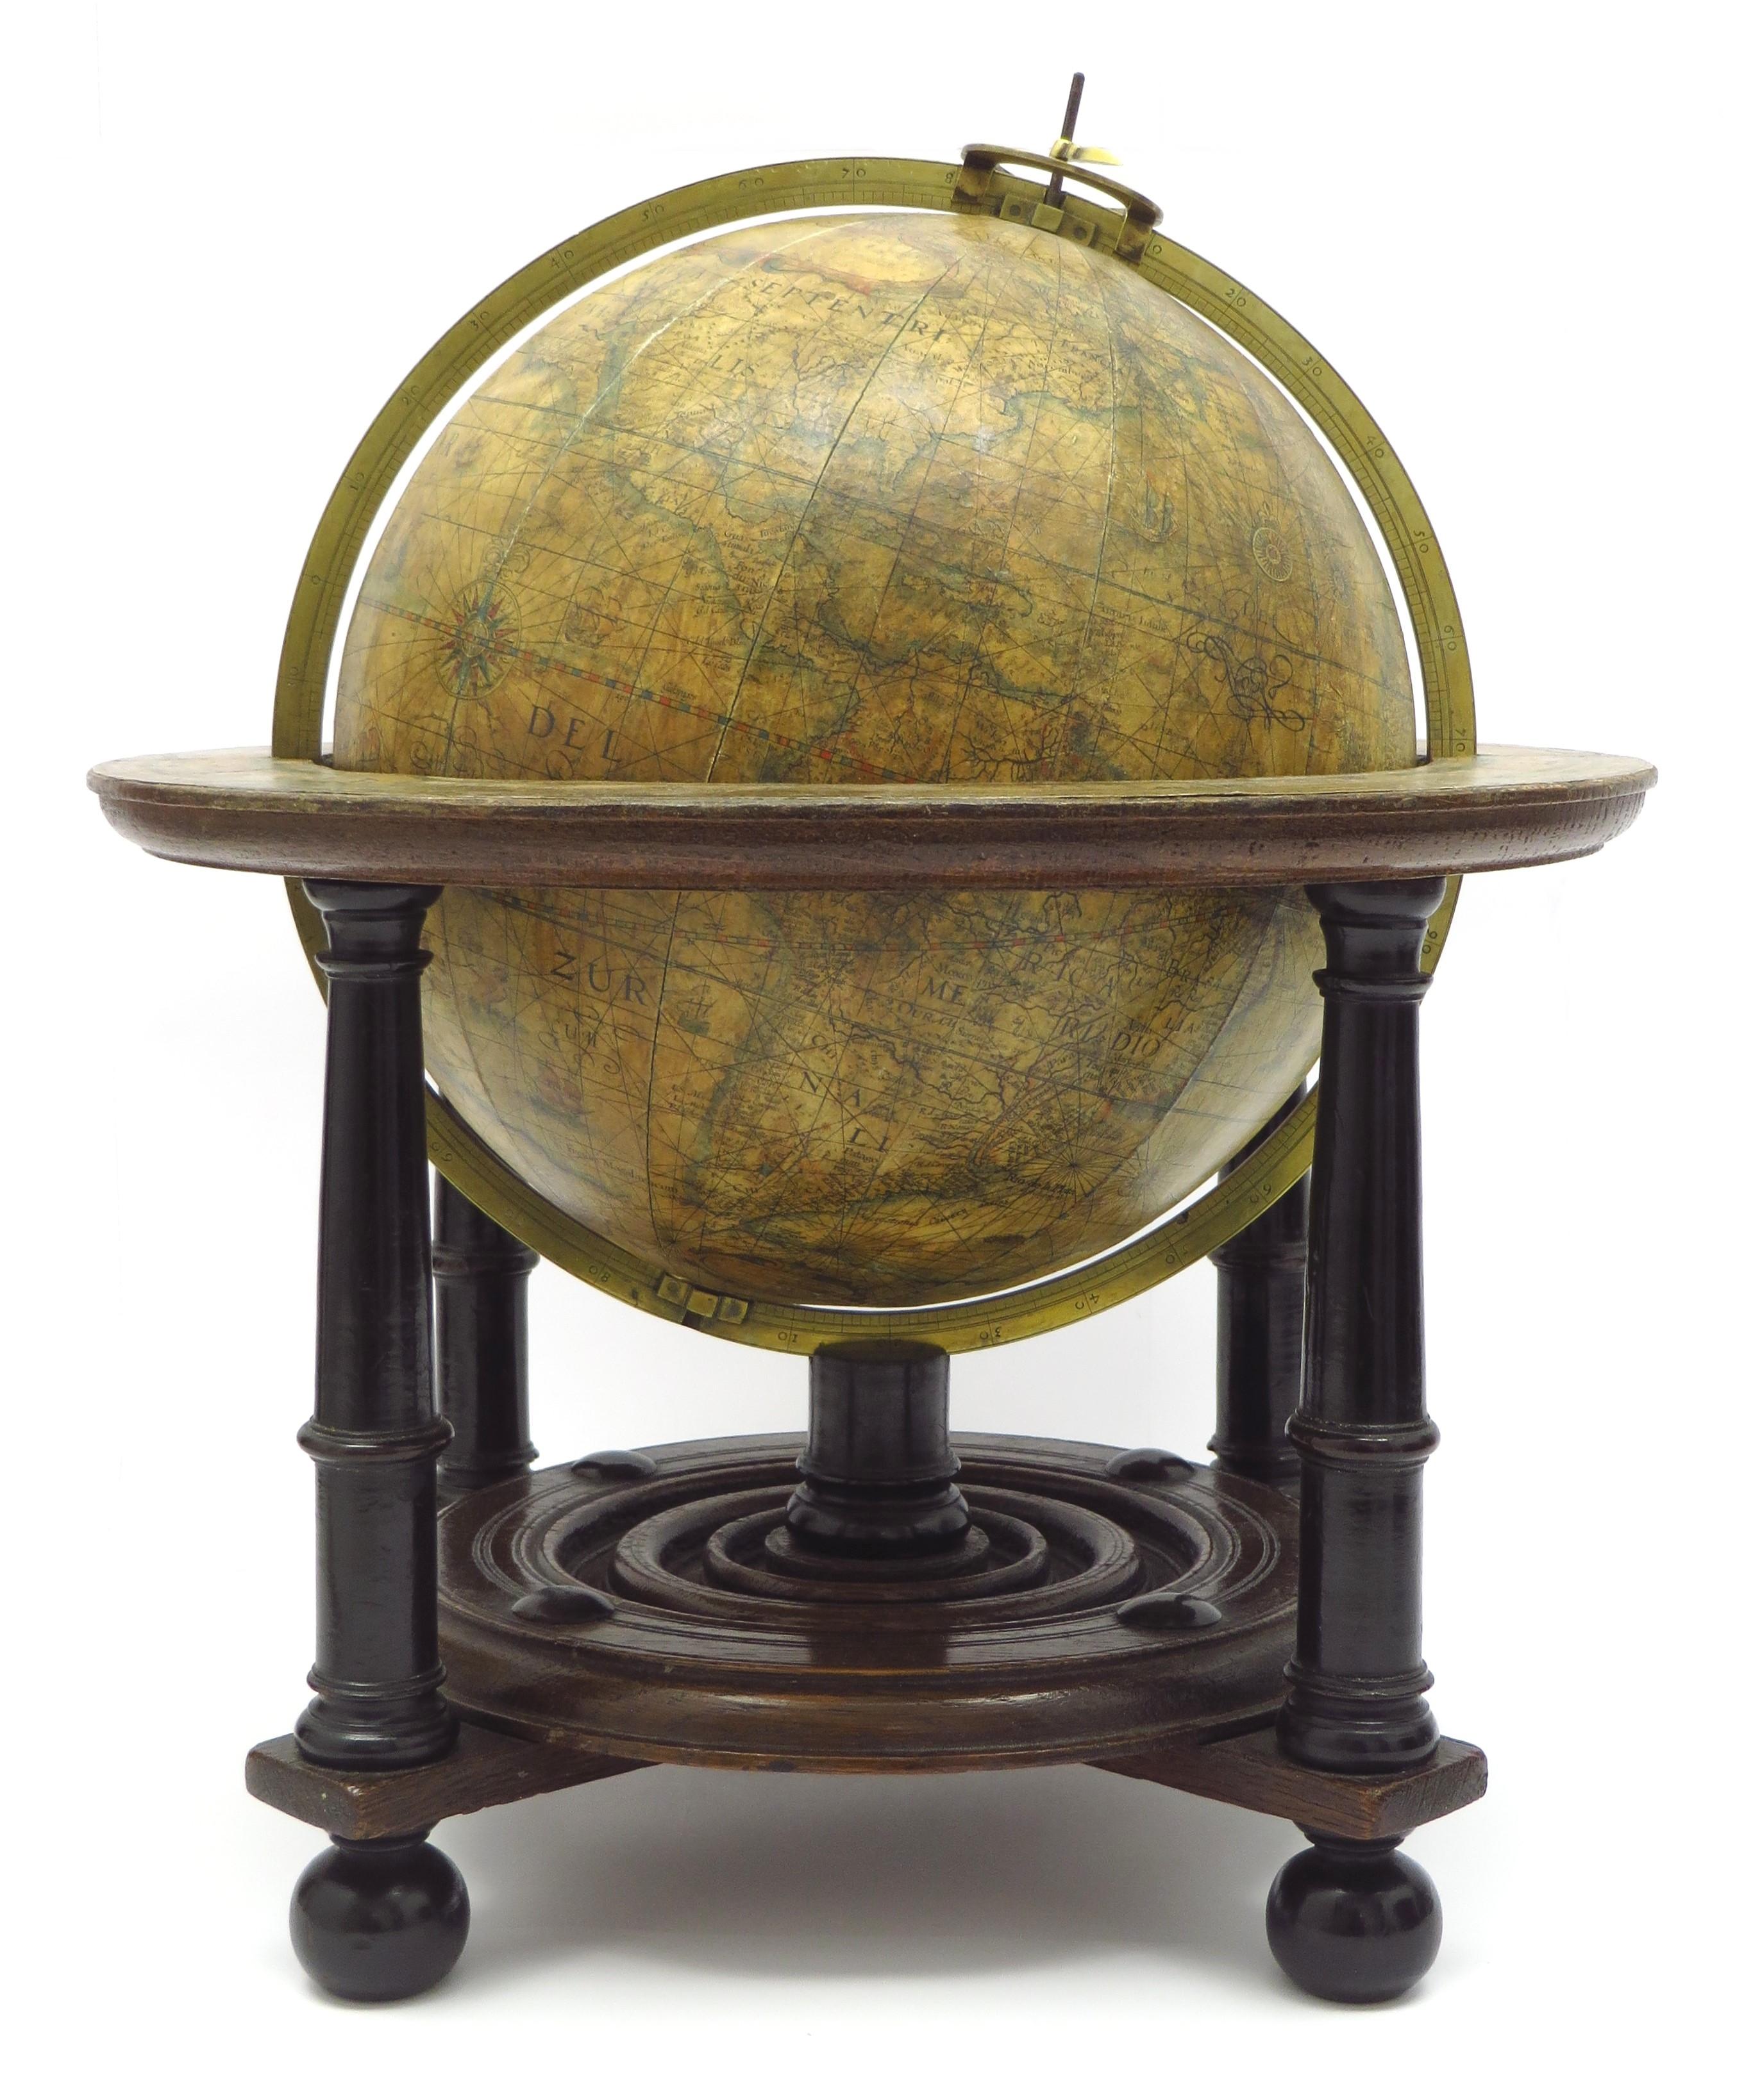 A very rare set of globes, 9 inch / 23cm, with an overall height of 38 cm, Amsterdam, dated 1602, but published after 1621. In their original stands with circular wooden horizon rings, covered with printed paper, supported by four legs and brass